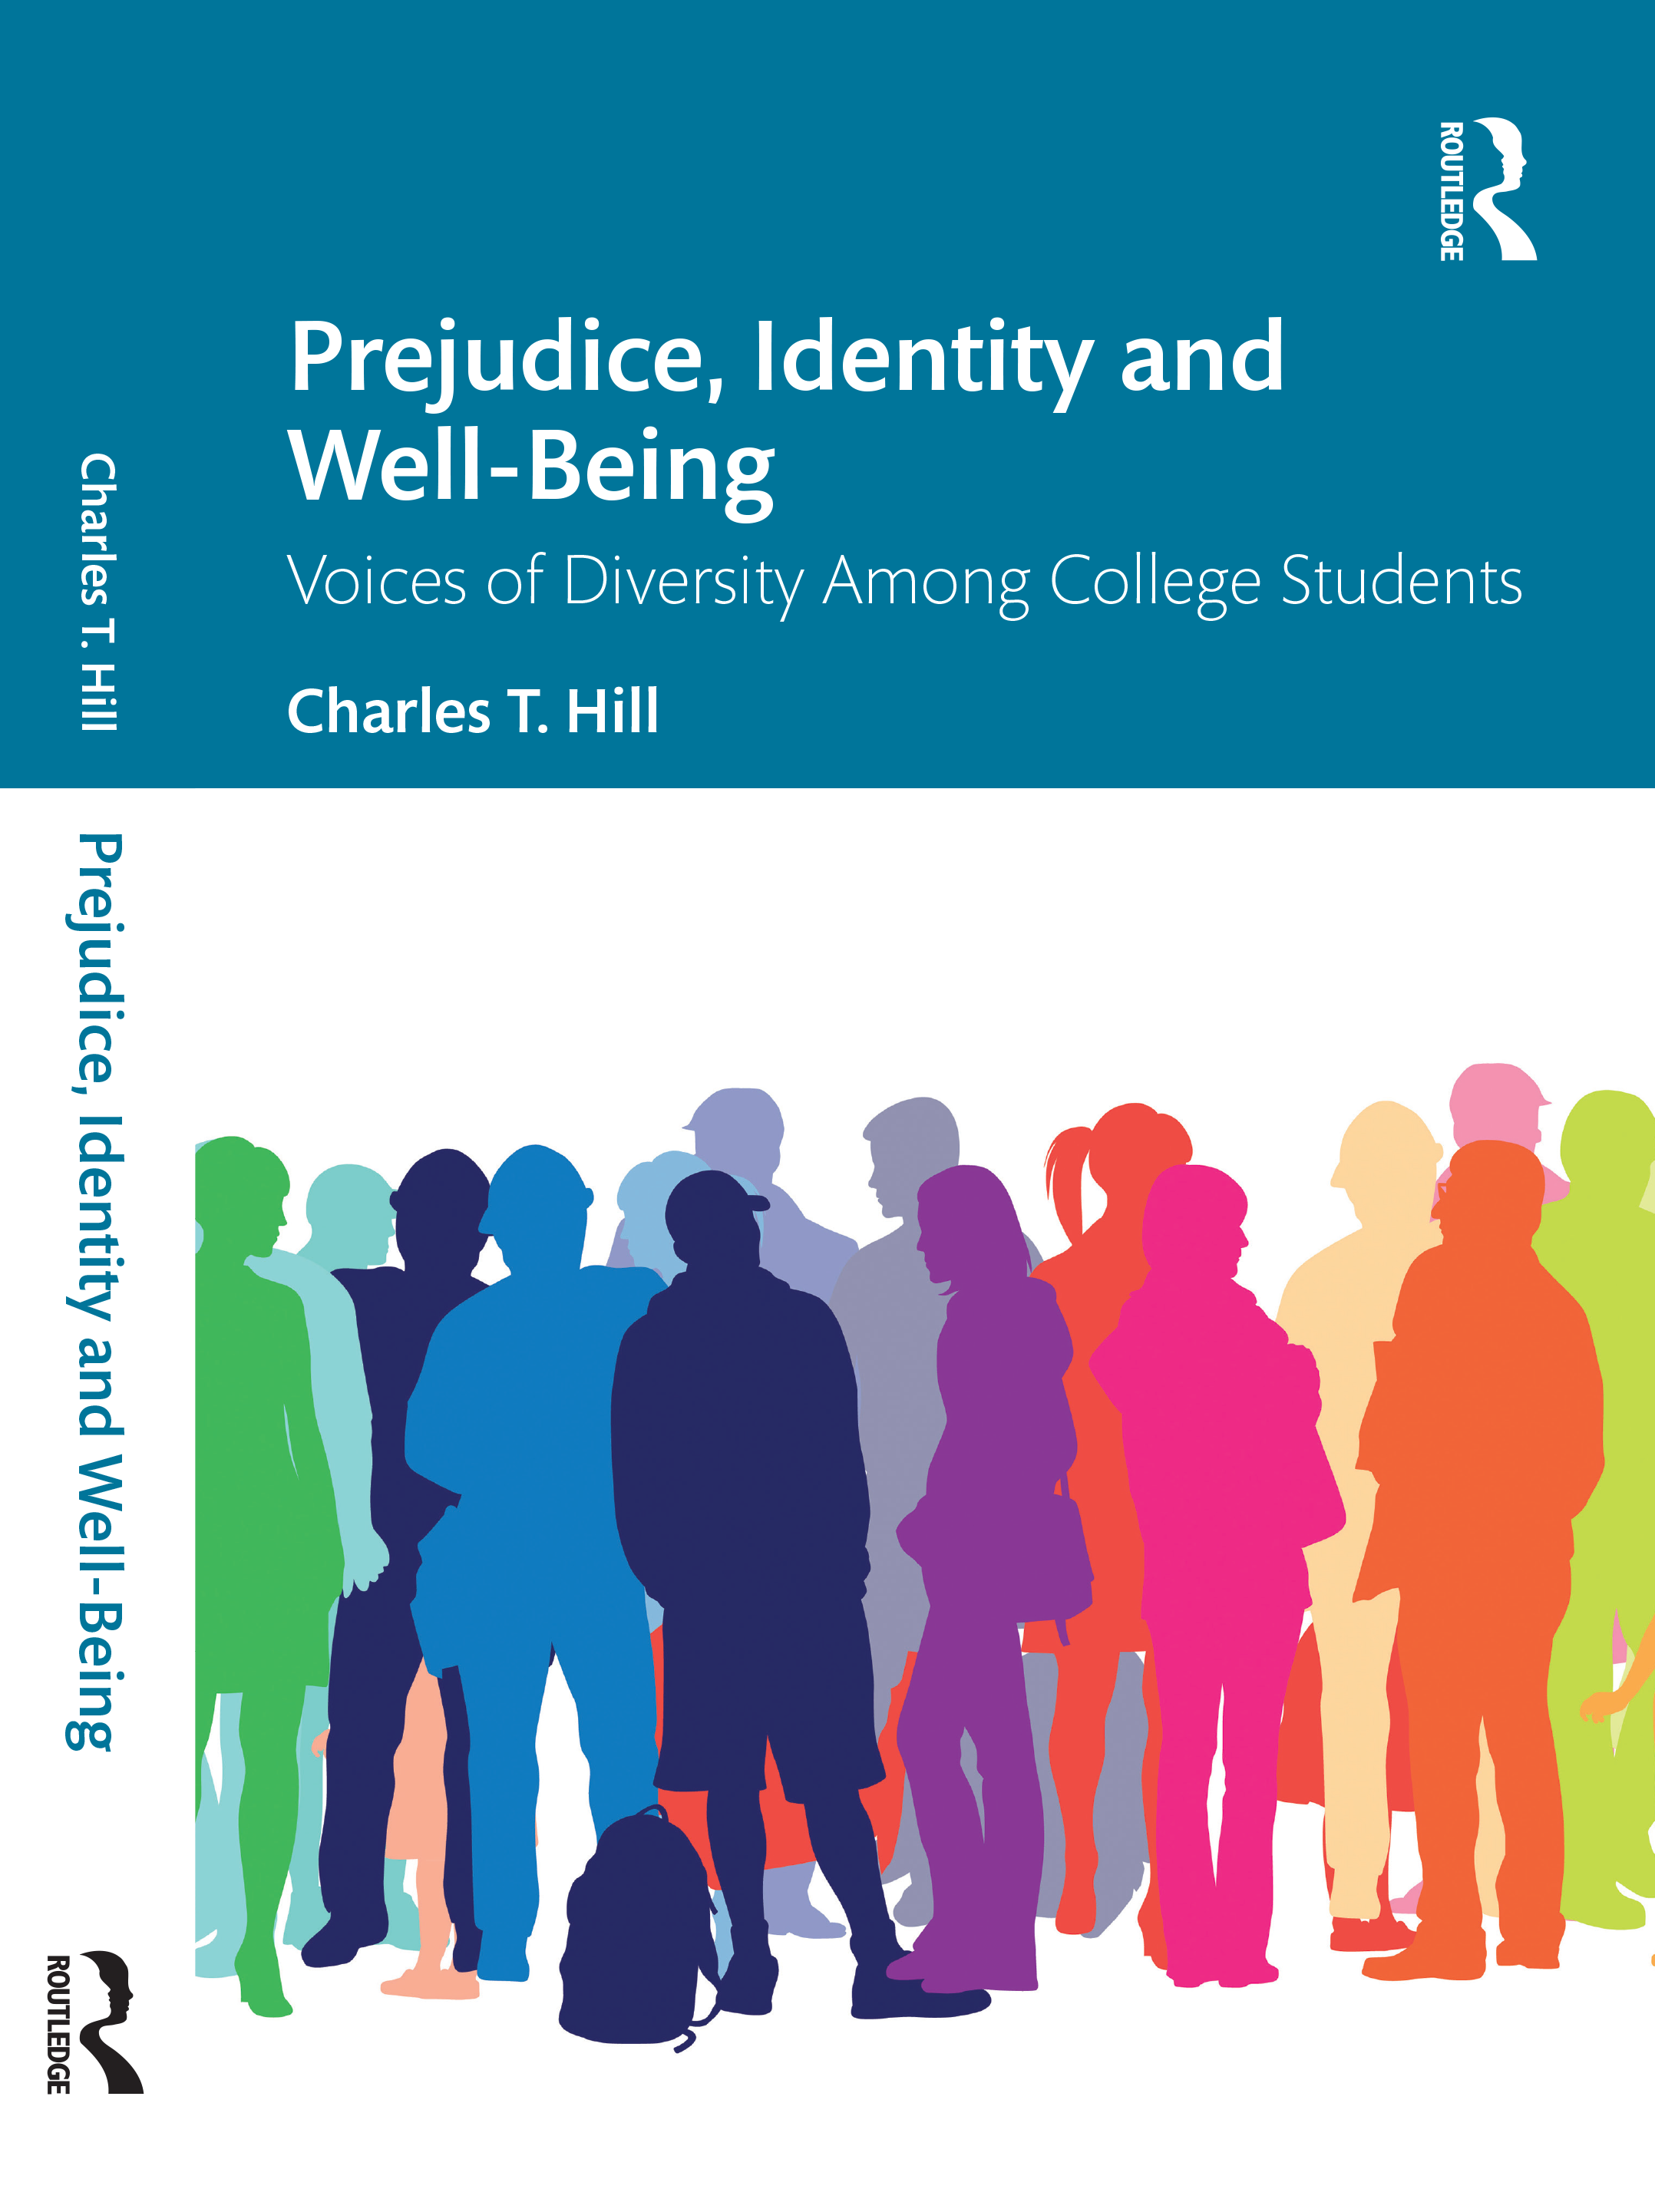 book cover: Prejudice, Identity, and Well-Being: Voices of Diversity Among College Students